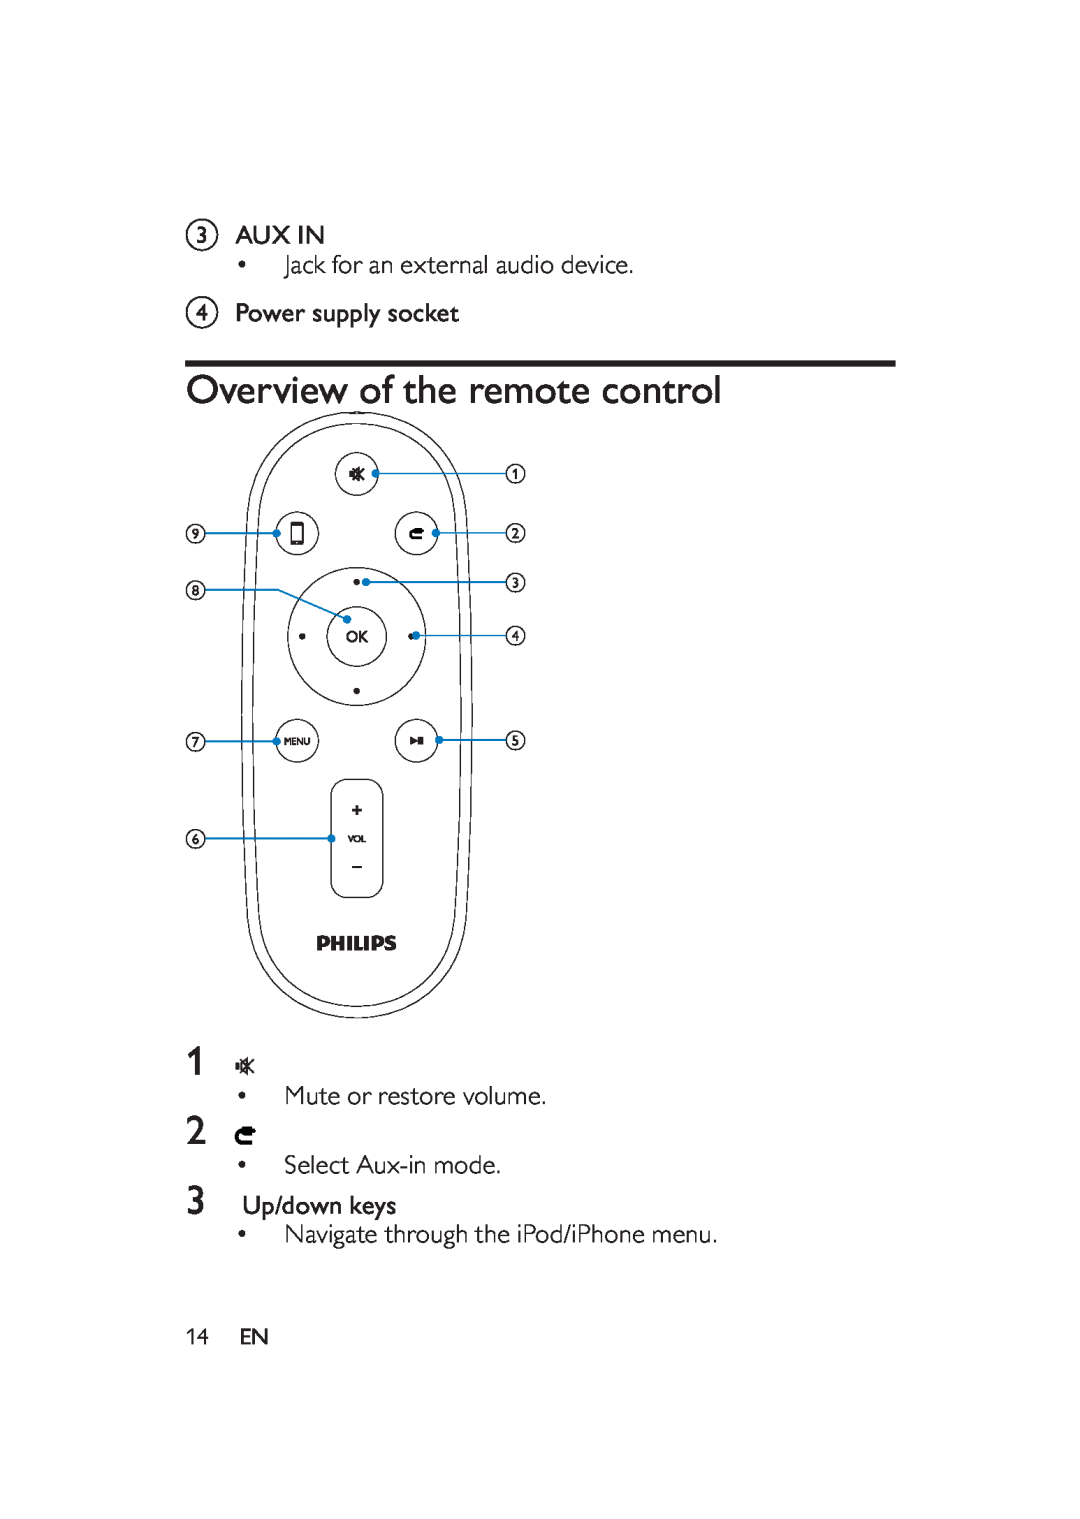 Philips DS9000/37 Overview of the remote control, c AUX IN Jack for an external audio device d Power supply socket, hc d 